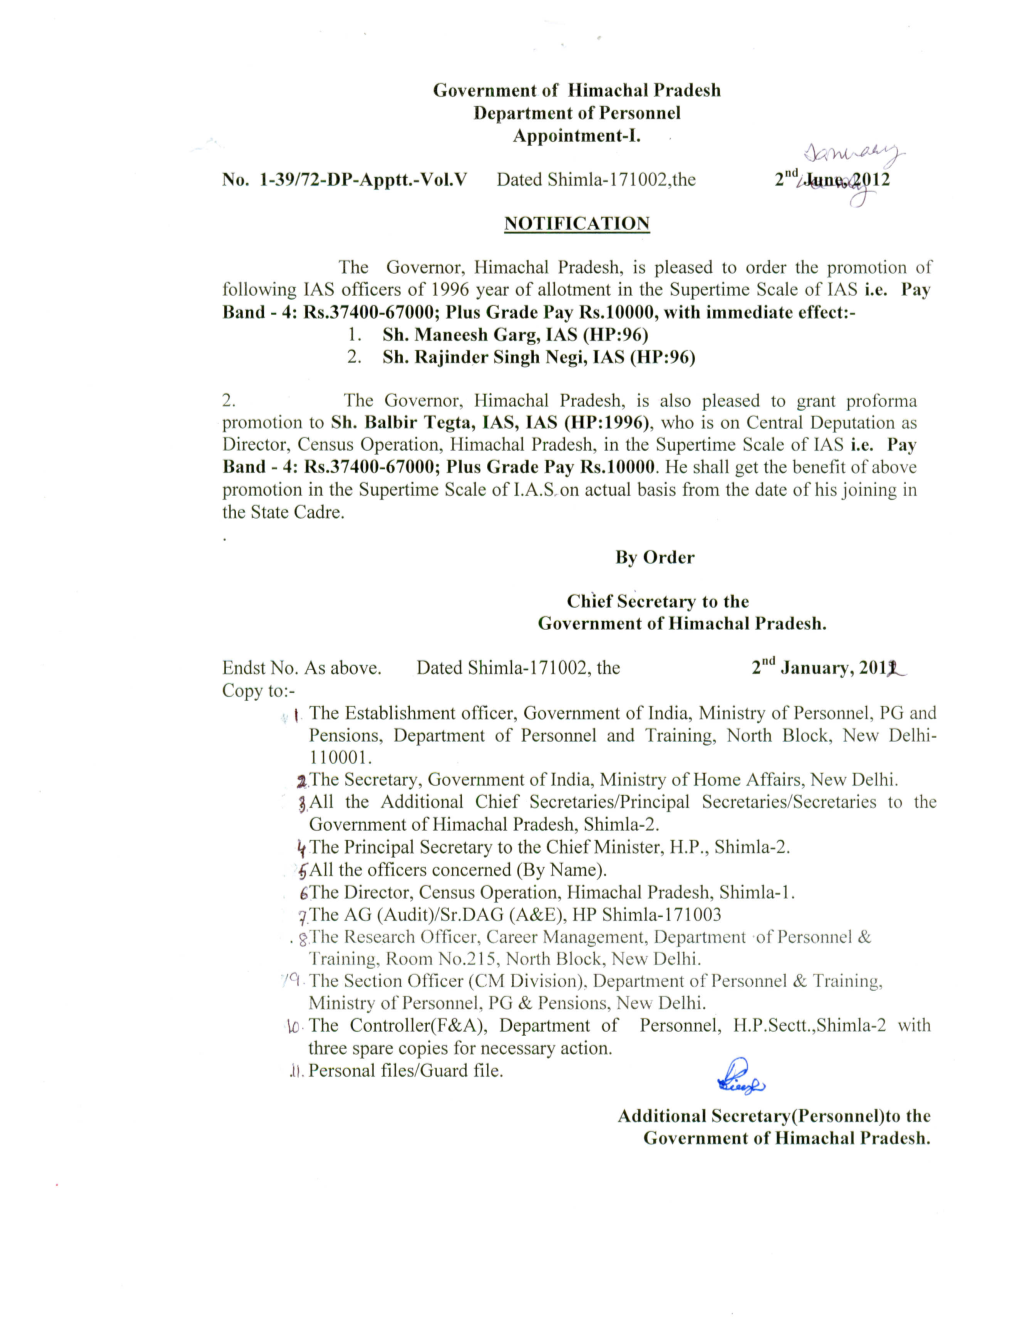 Promotion Orders of IAS Officers